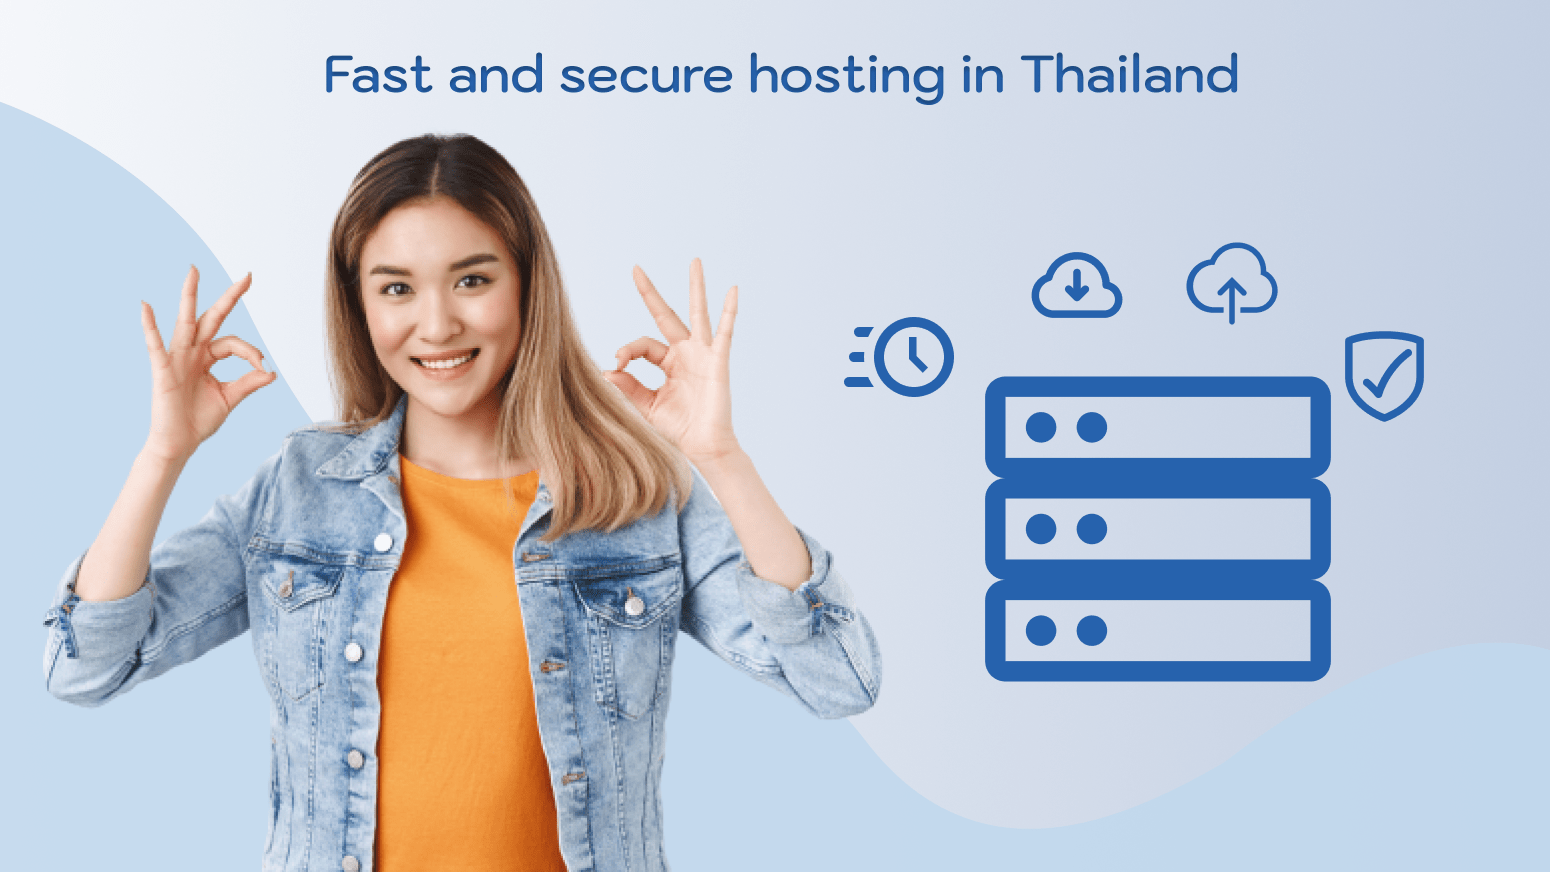 Fast and secure hosting in Thailand